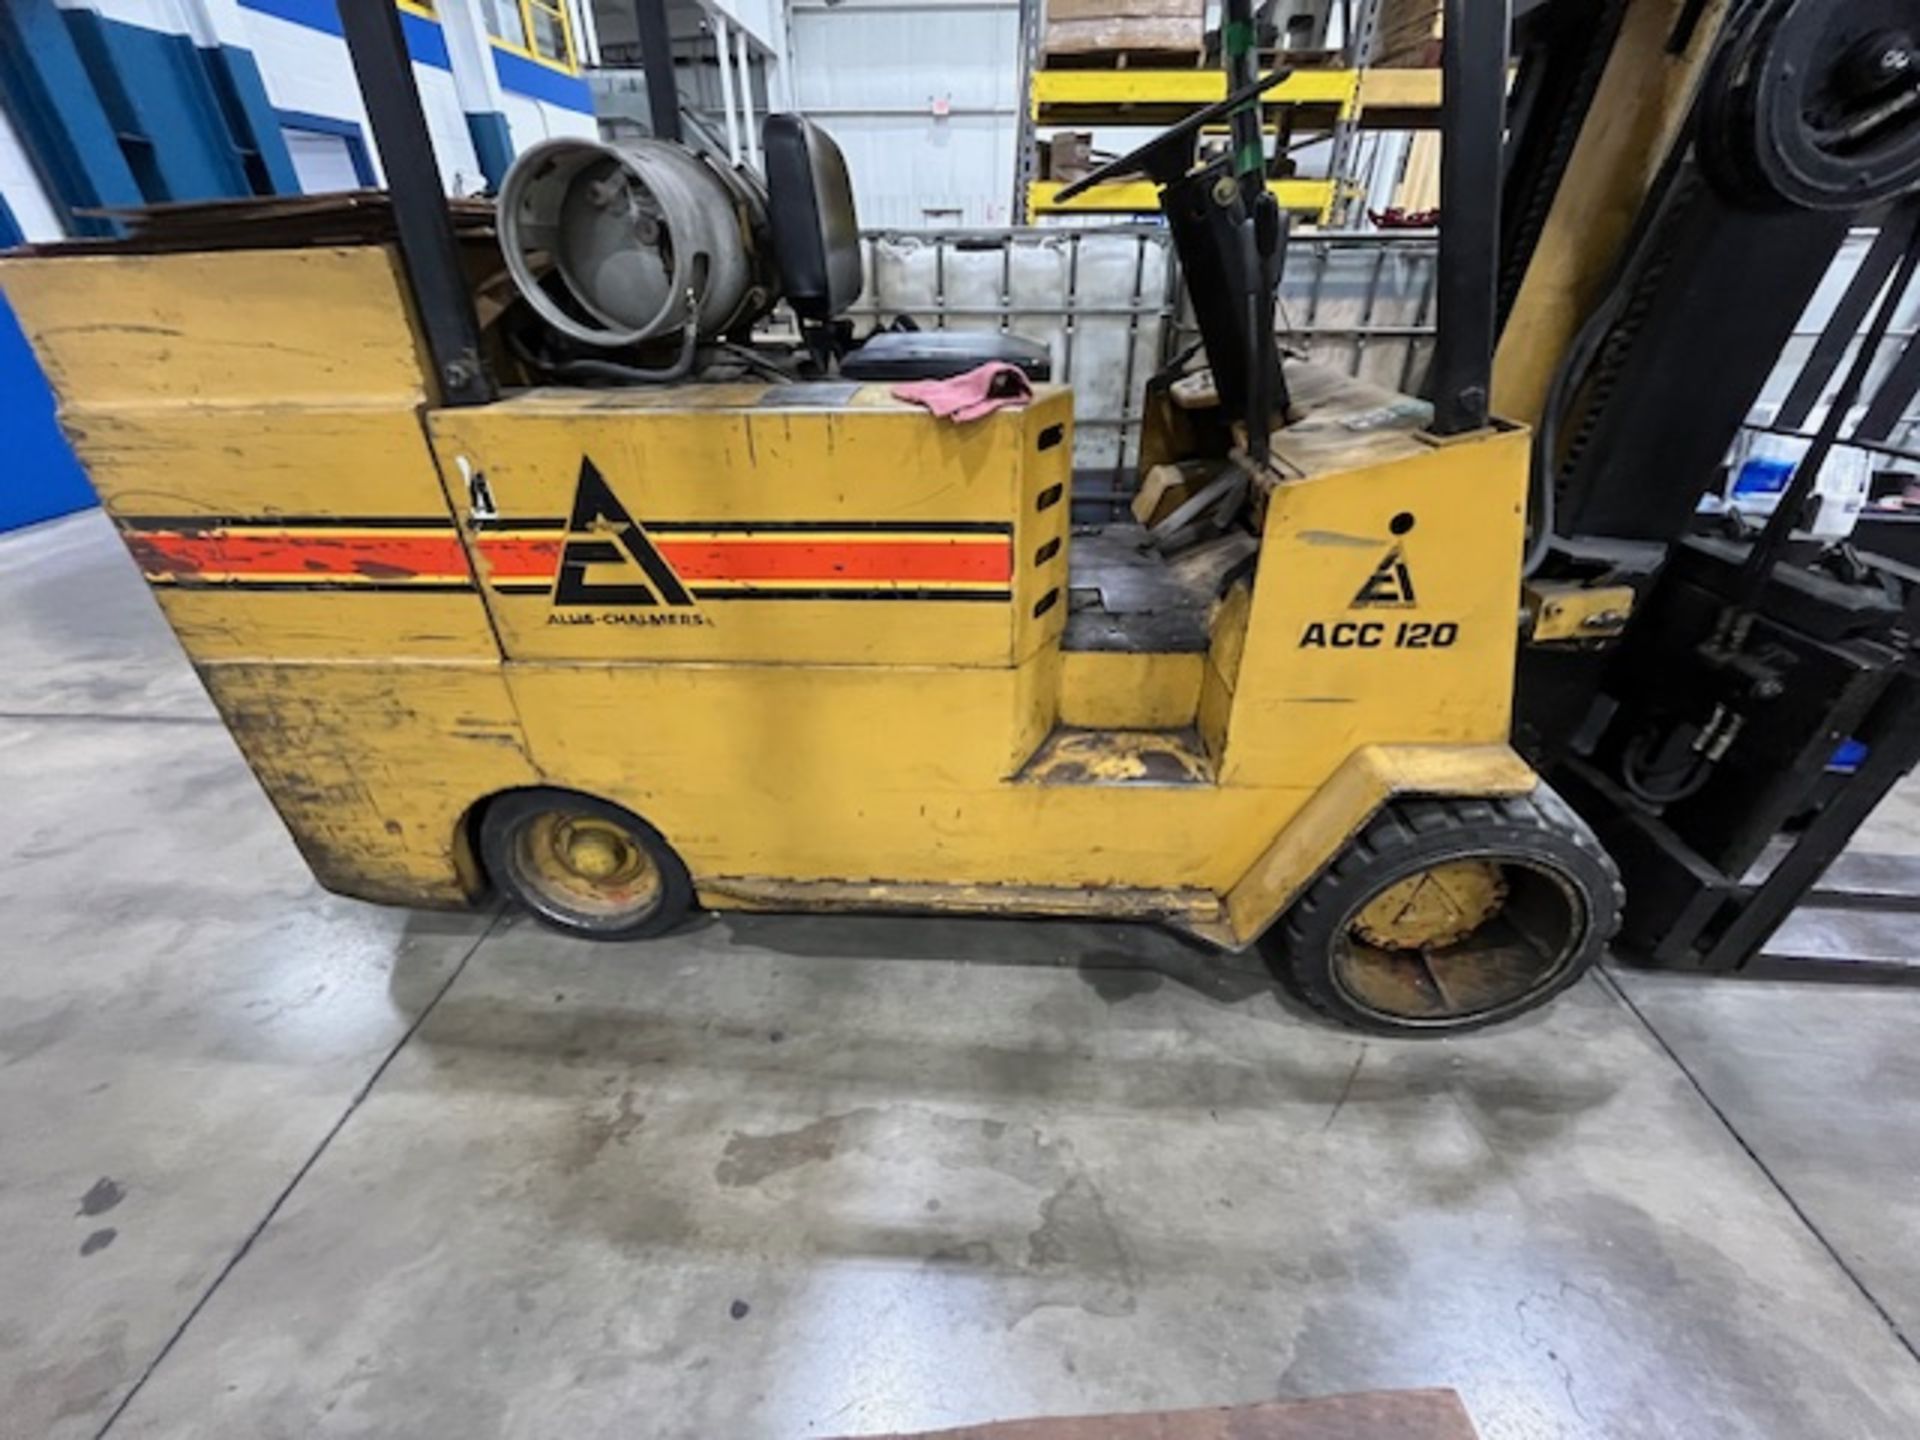 ALLIS-CHALMERS ACC 120 Forklift 12,000 lb. Cap. (approx.) 2-Stage LP Riding Fork Lift, 134" Reach - Image 2 of 2